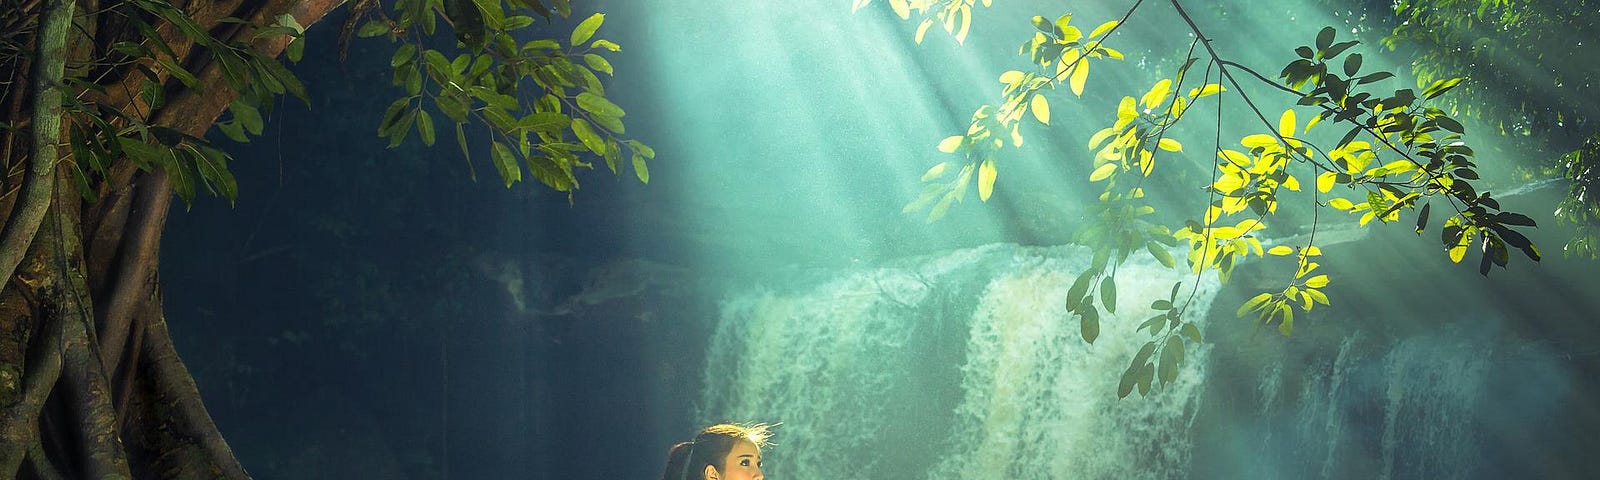 In a forest, a young woman sits on a root of a large tree that bends over her head beside a waterfall. Sun rays shine through the leaves above her head.